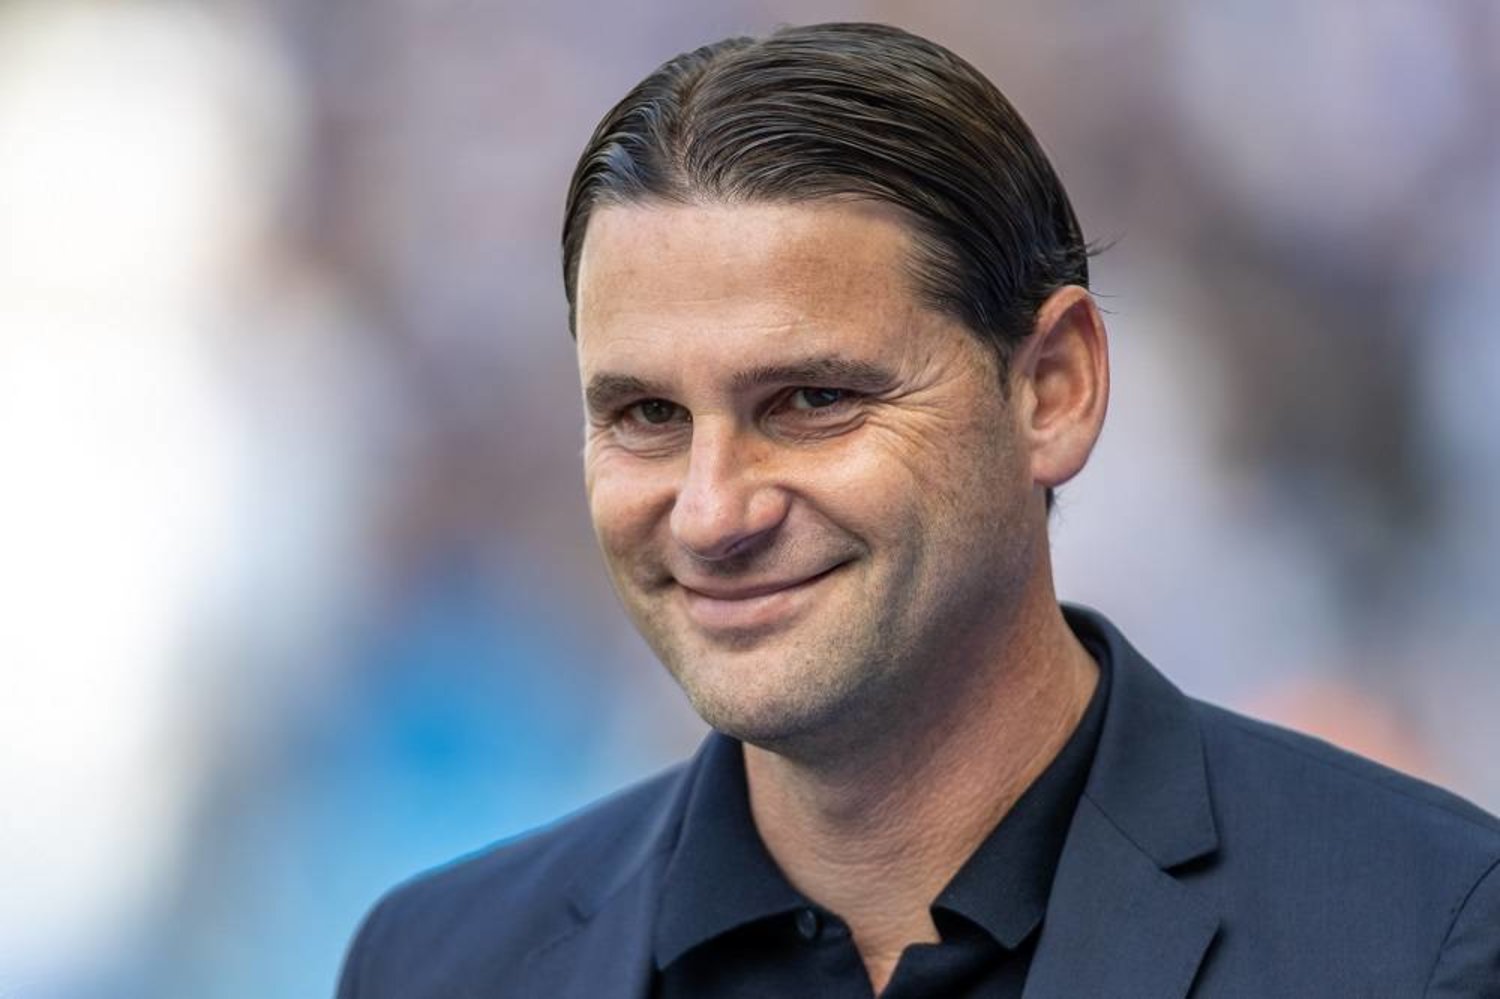 10 September 2022, Berlin: Gerardo Seoane, then Bayer Leverkusen's coach, is pictured before the start of the German Bundesliga soccer match between Hertha BSC and Bayer Leverkusen at the Olympiastadion. (dpa) 